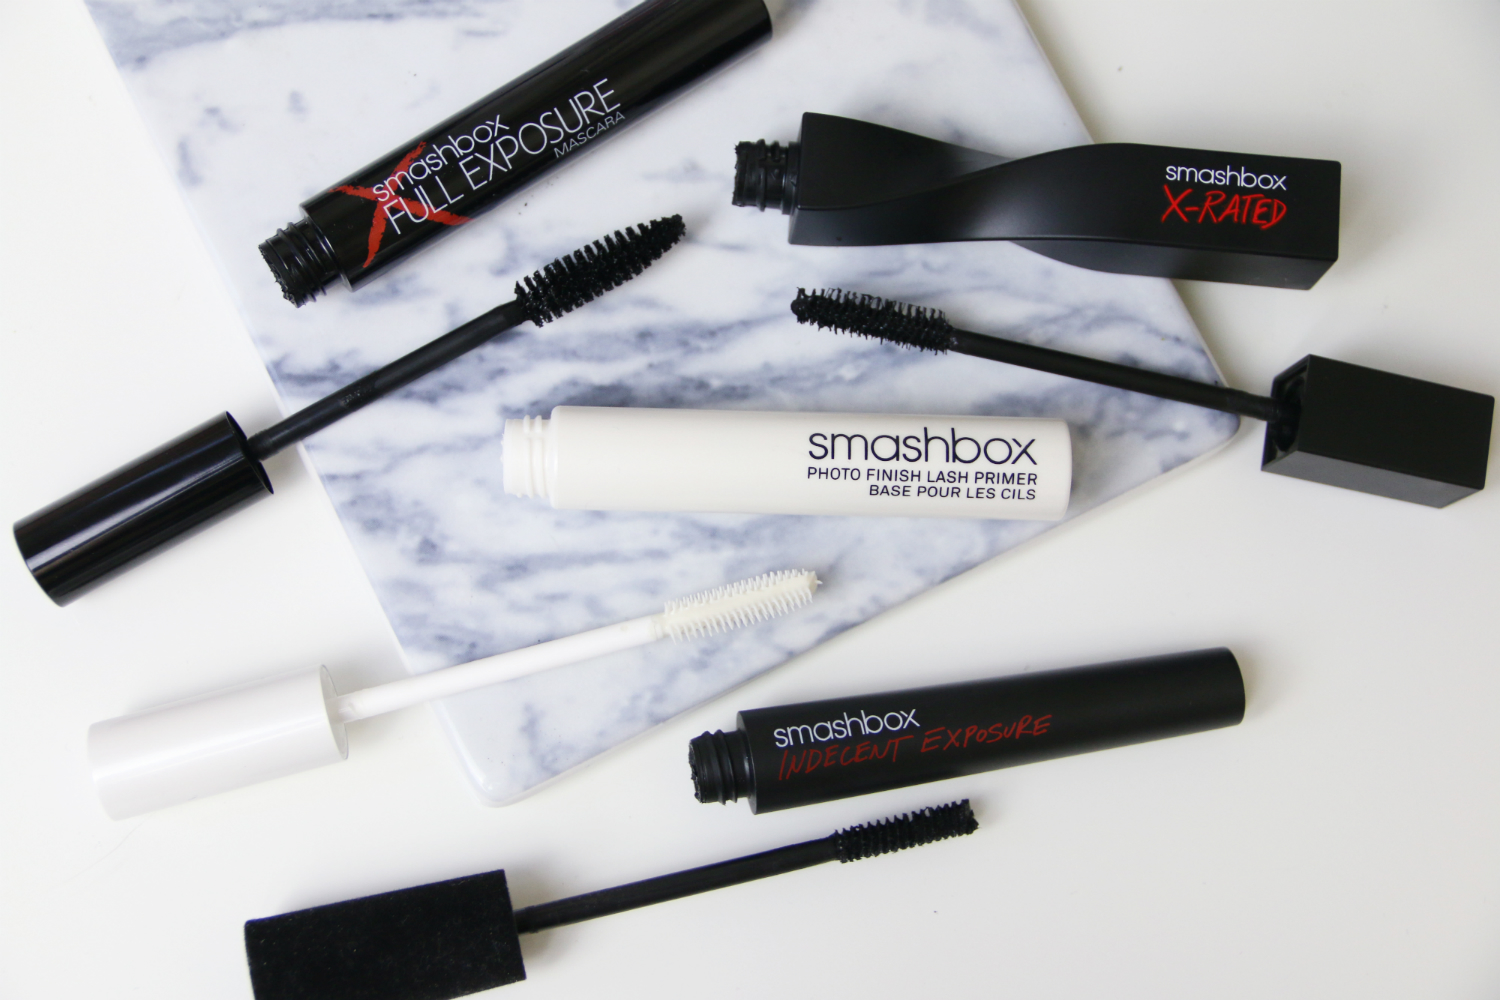 REVIEW: Smashbox Lights Without Mascara Collection! Katie Snooks